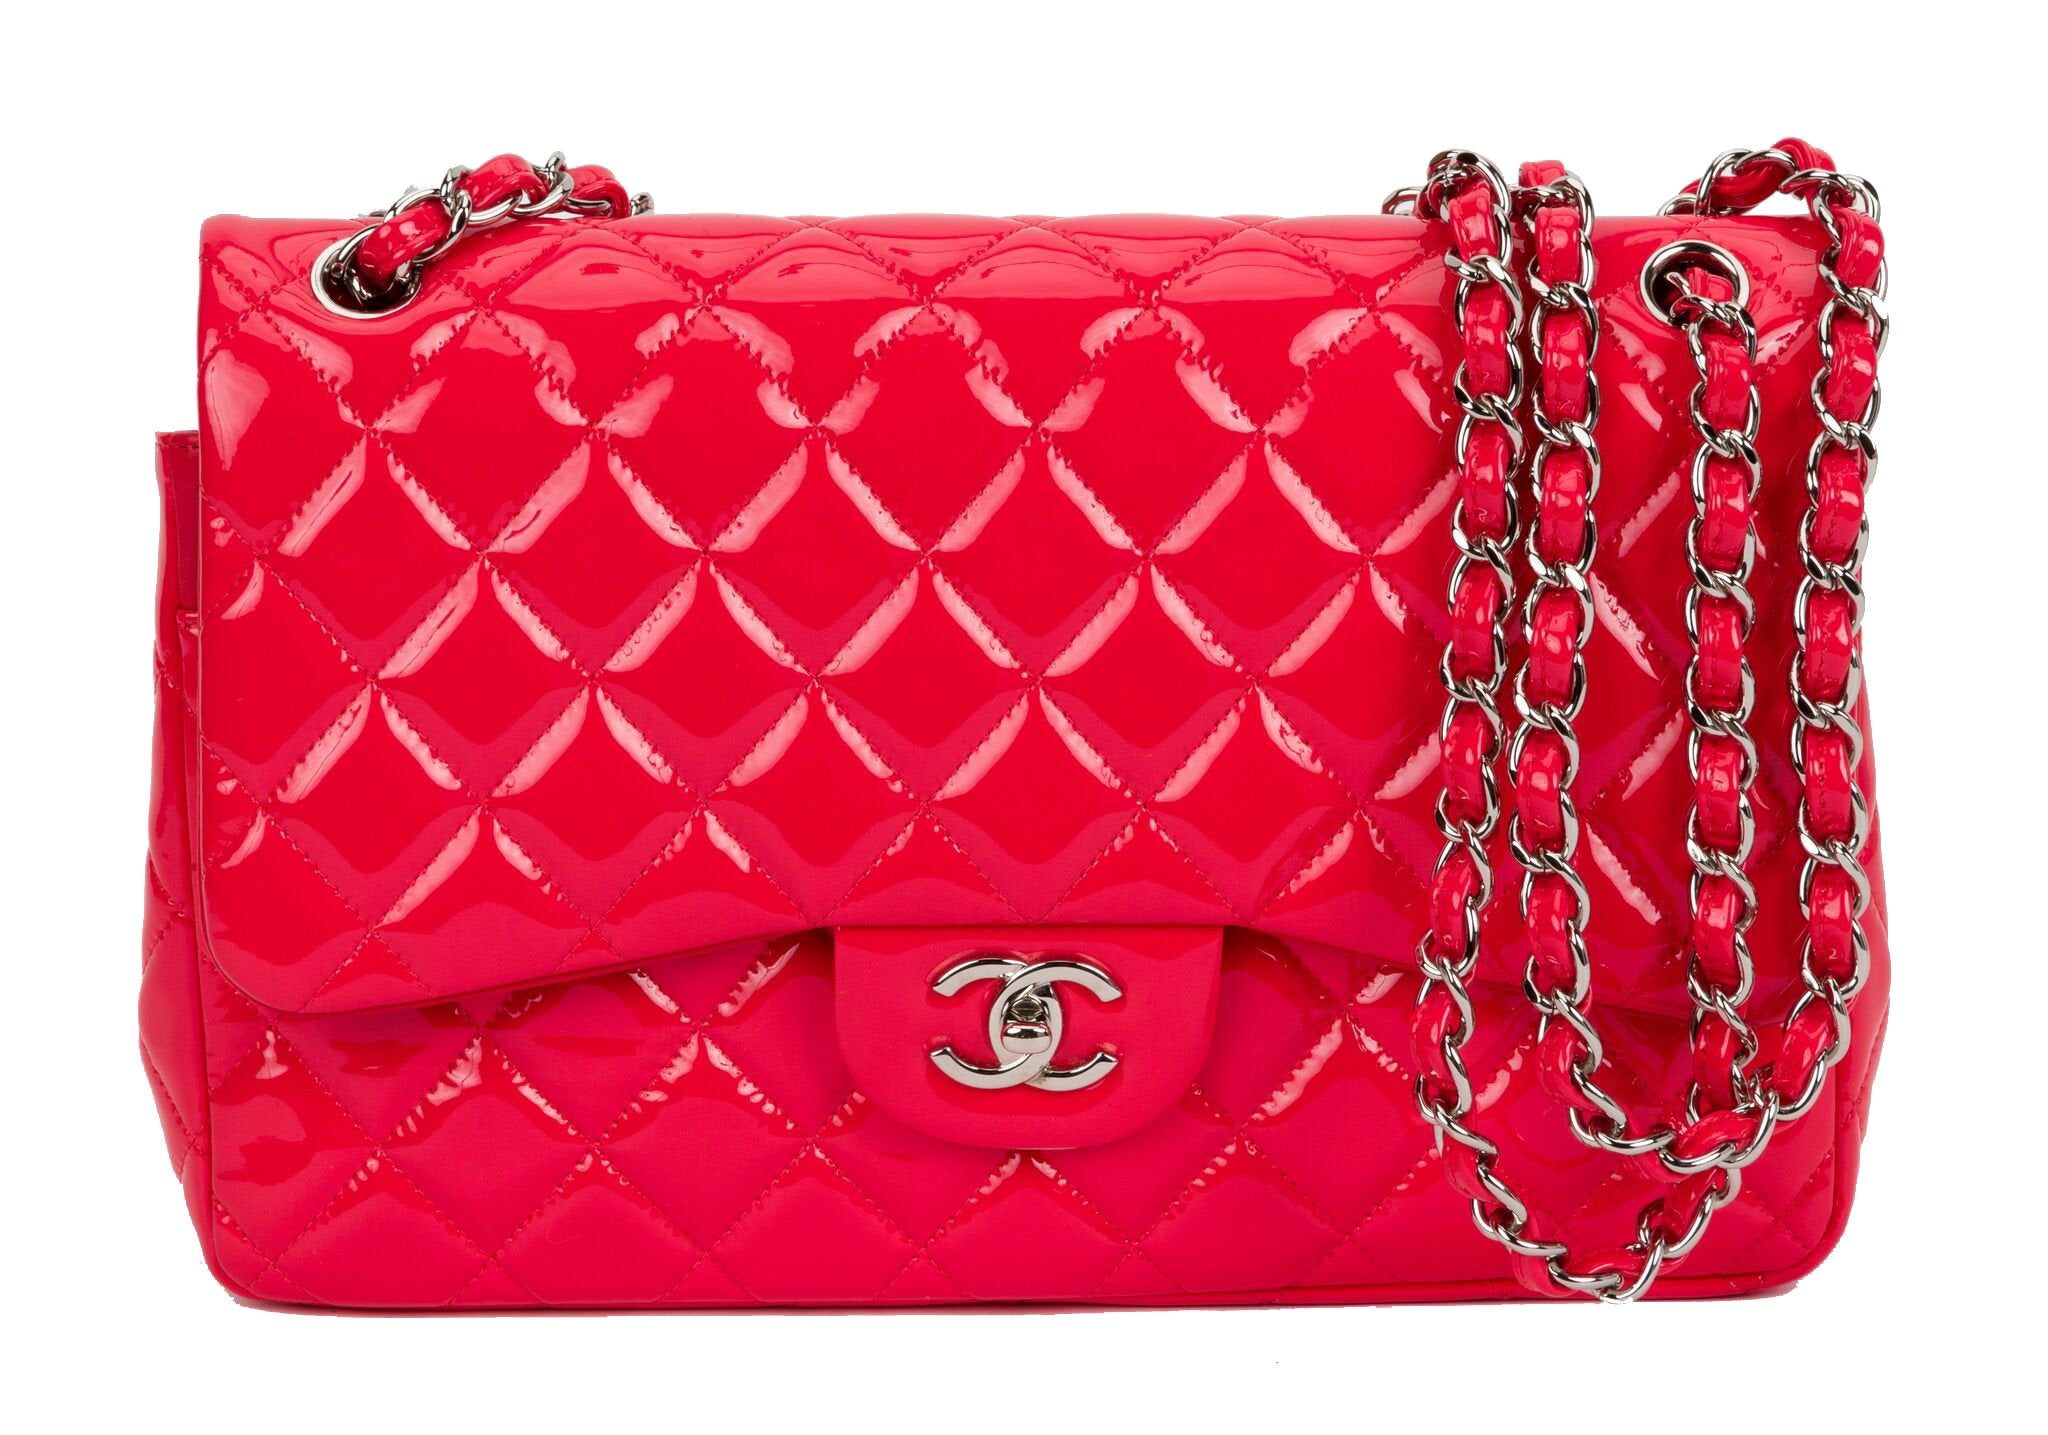 Chanel Coral Quilted Lambskin Mini Rectangular Classic Flap Bag